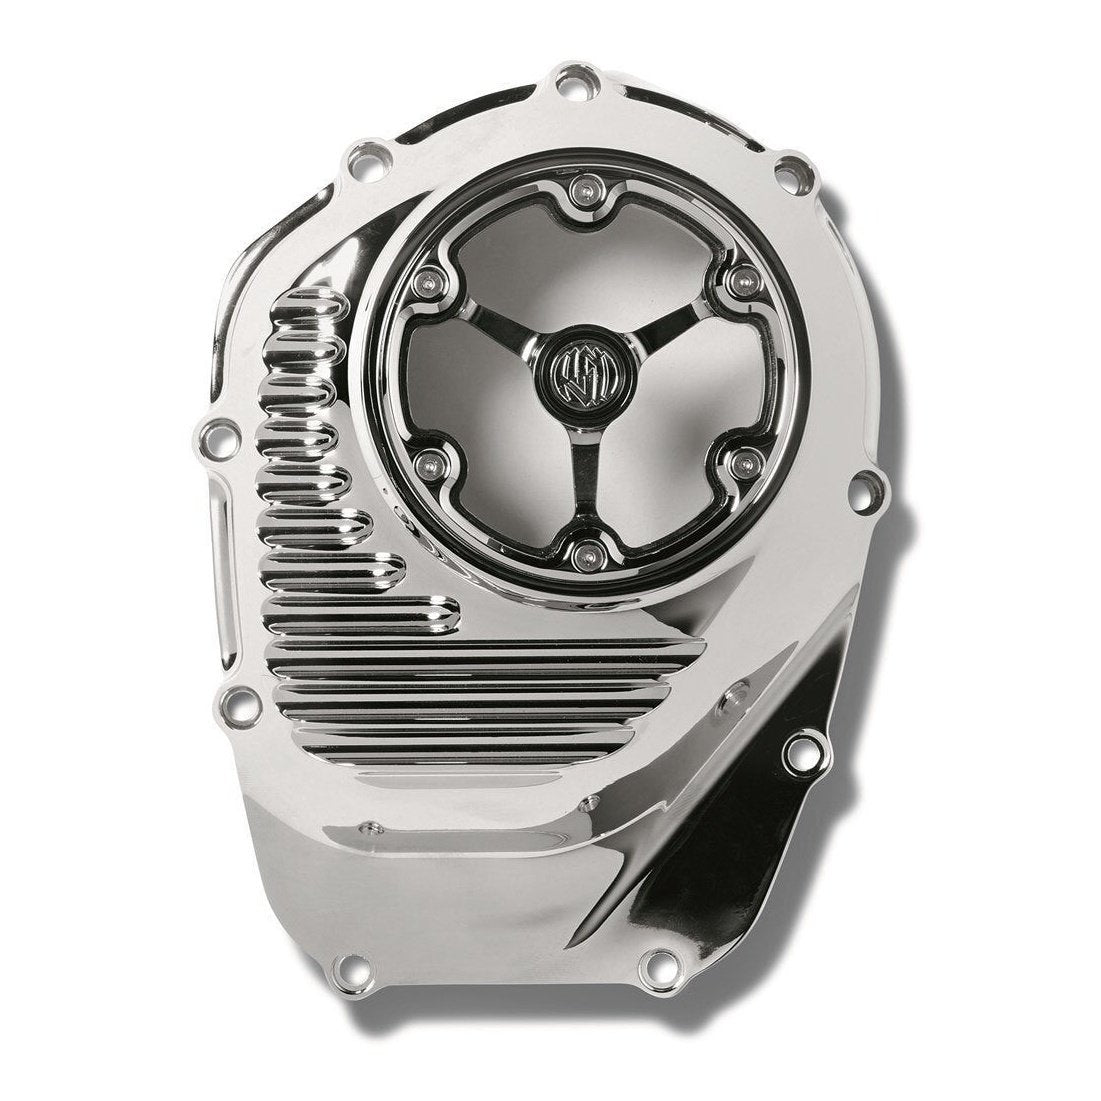 Clarity Cam Cover for Harley Milwaukee 8